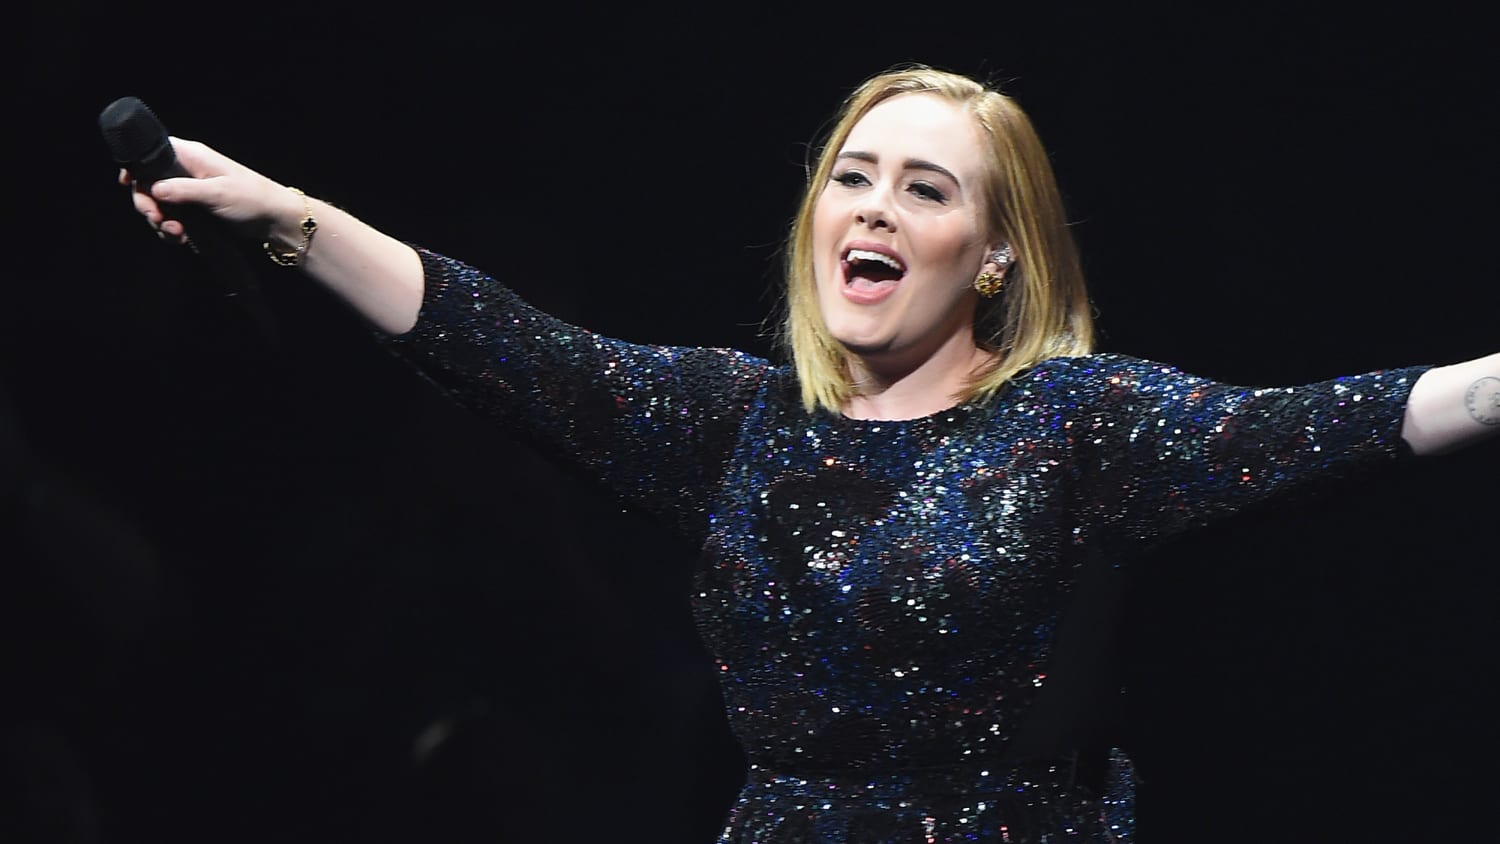 Adele shares sweet message from home after tour: 'Mummy you did it!' - TODAY.com2500 x 1407